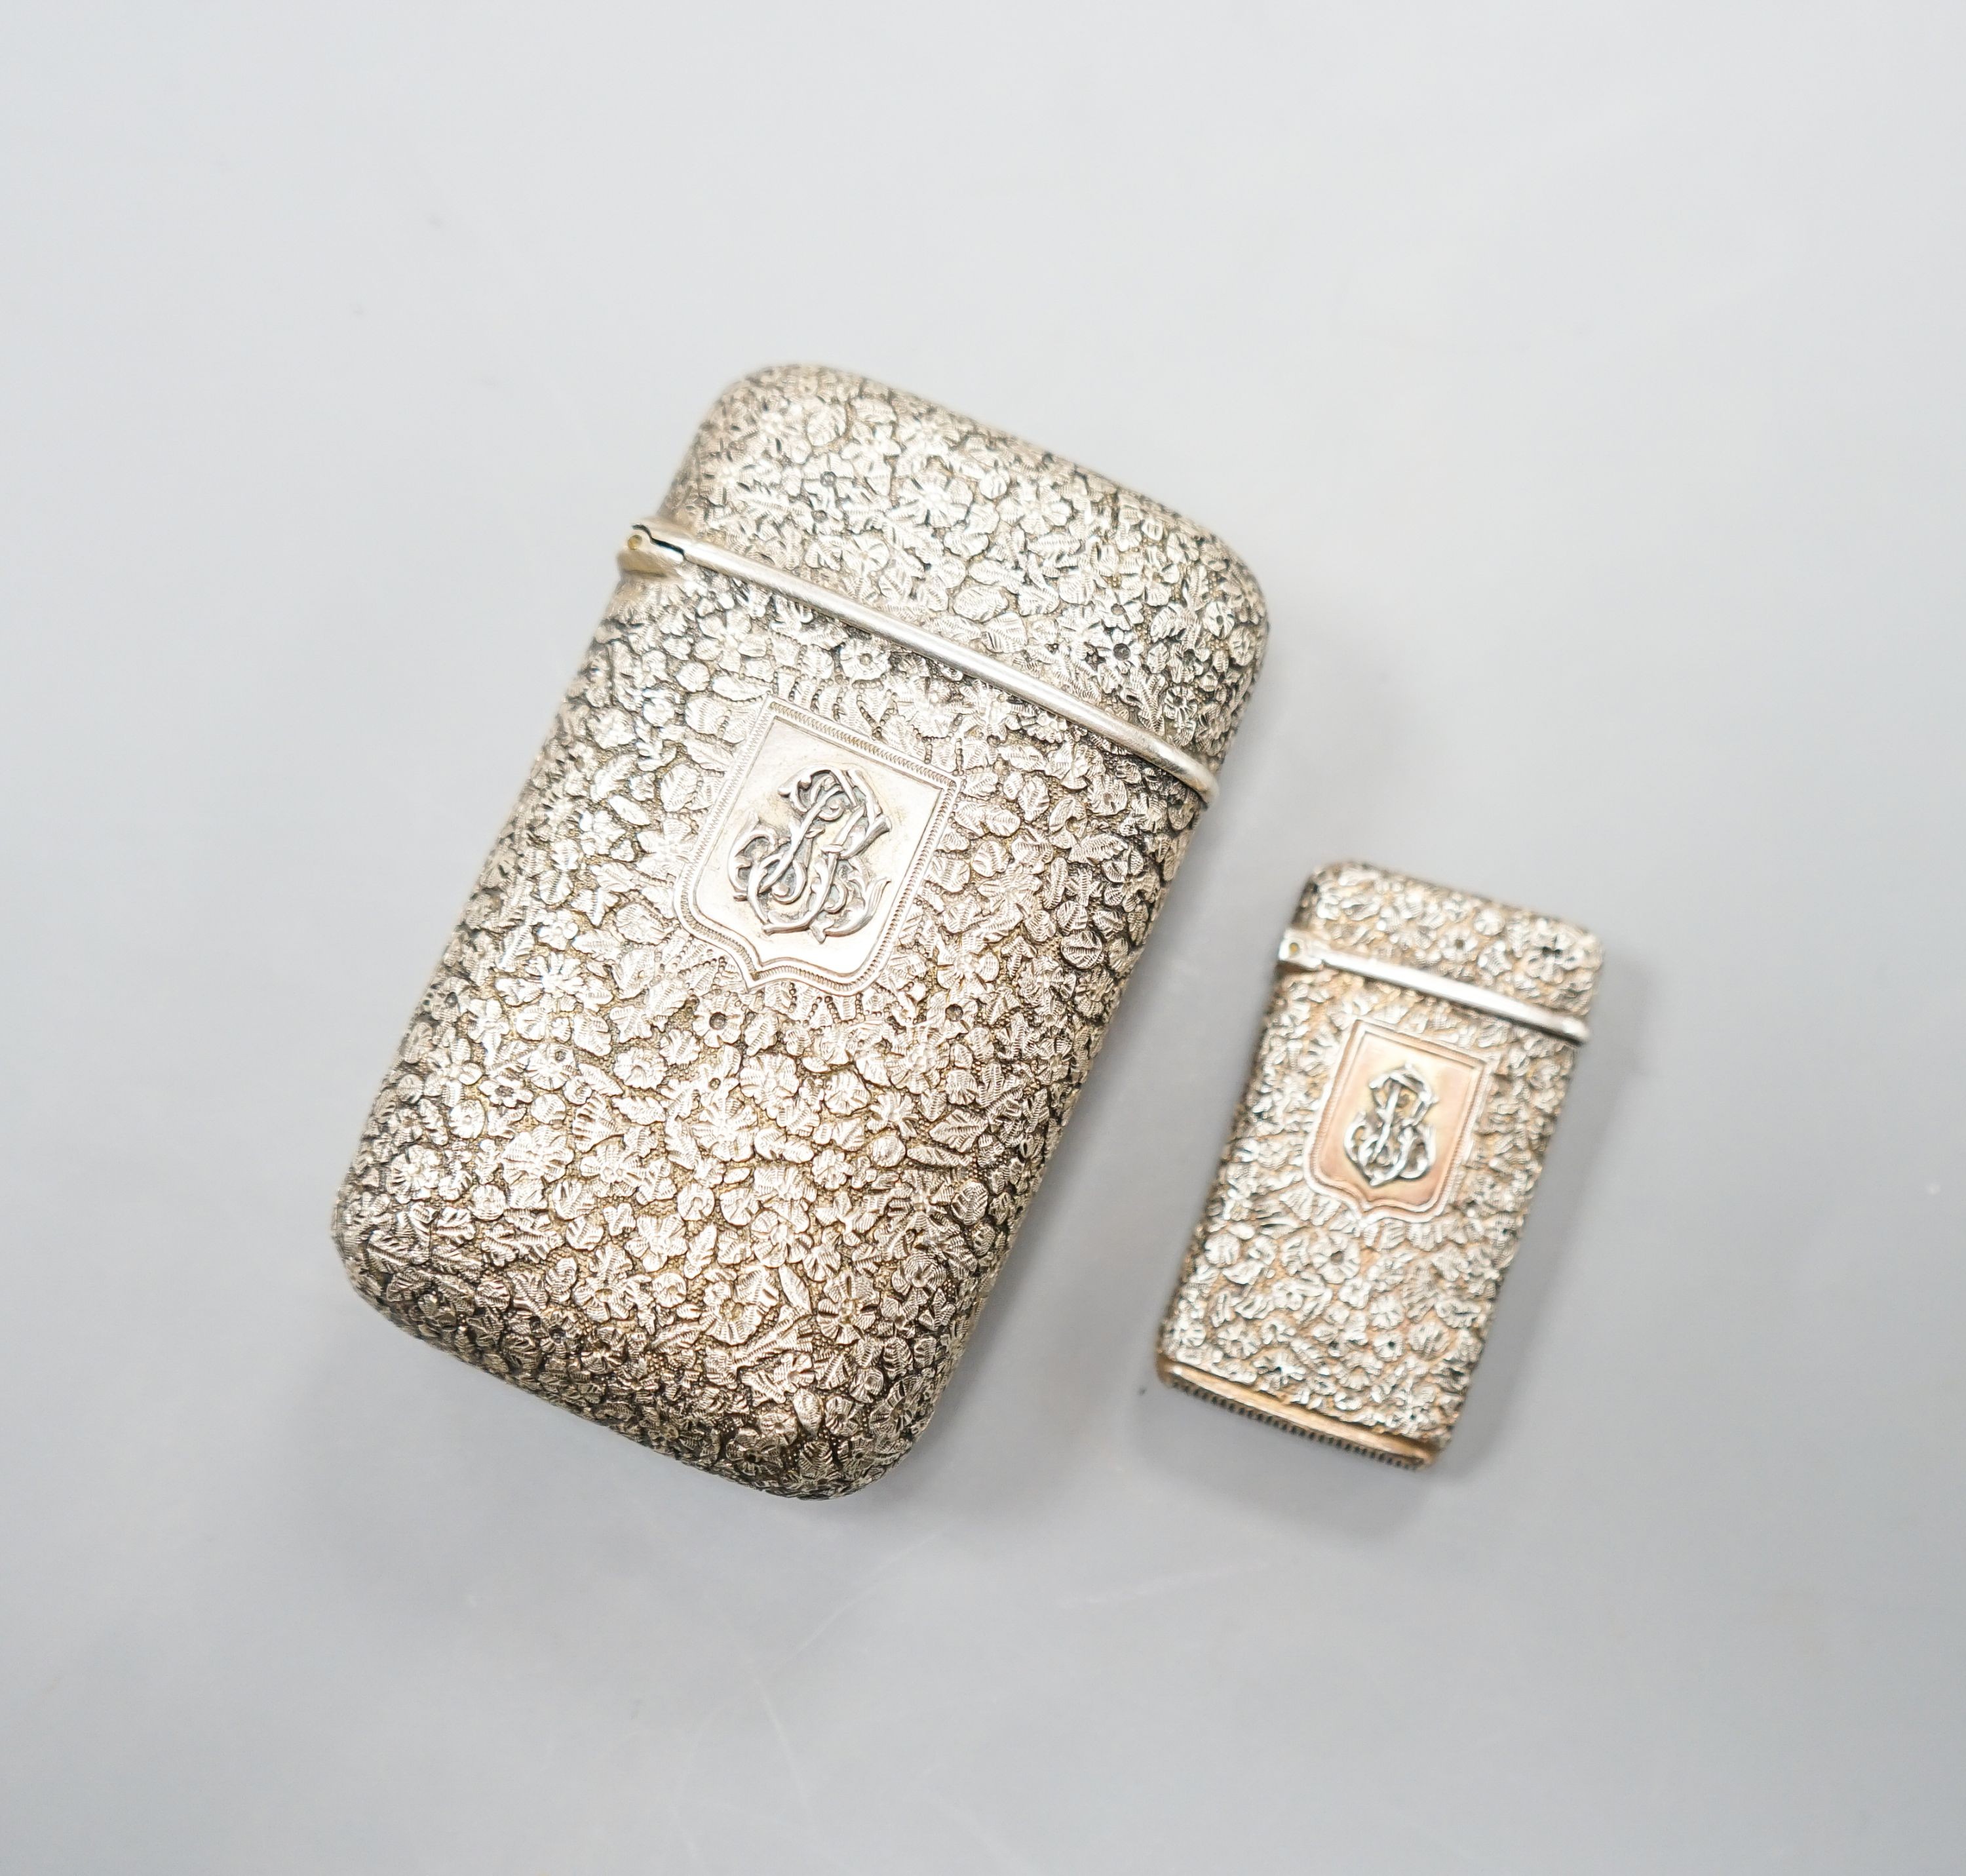 A late 19th century French embossed white metal cigarette case, 76mm, with monogram applique and a similar vesta case.